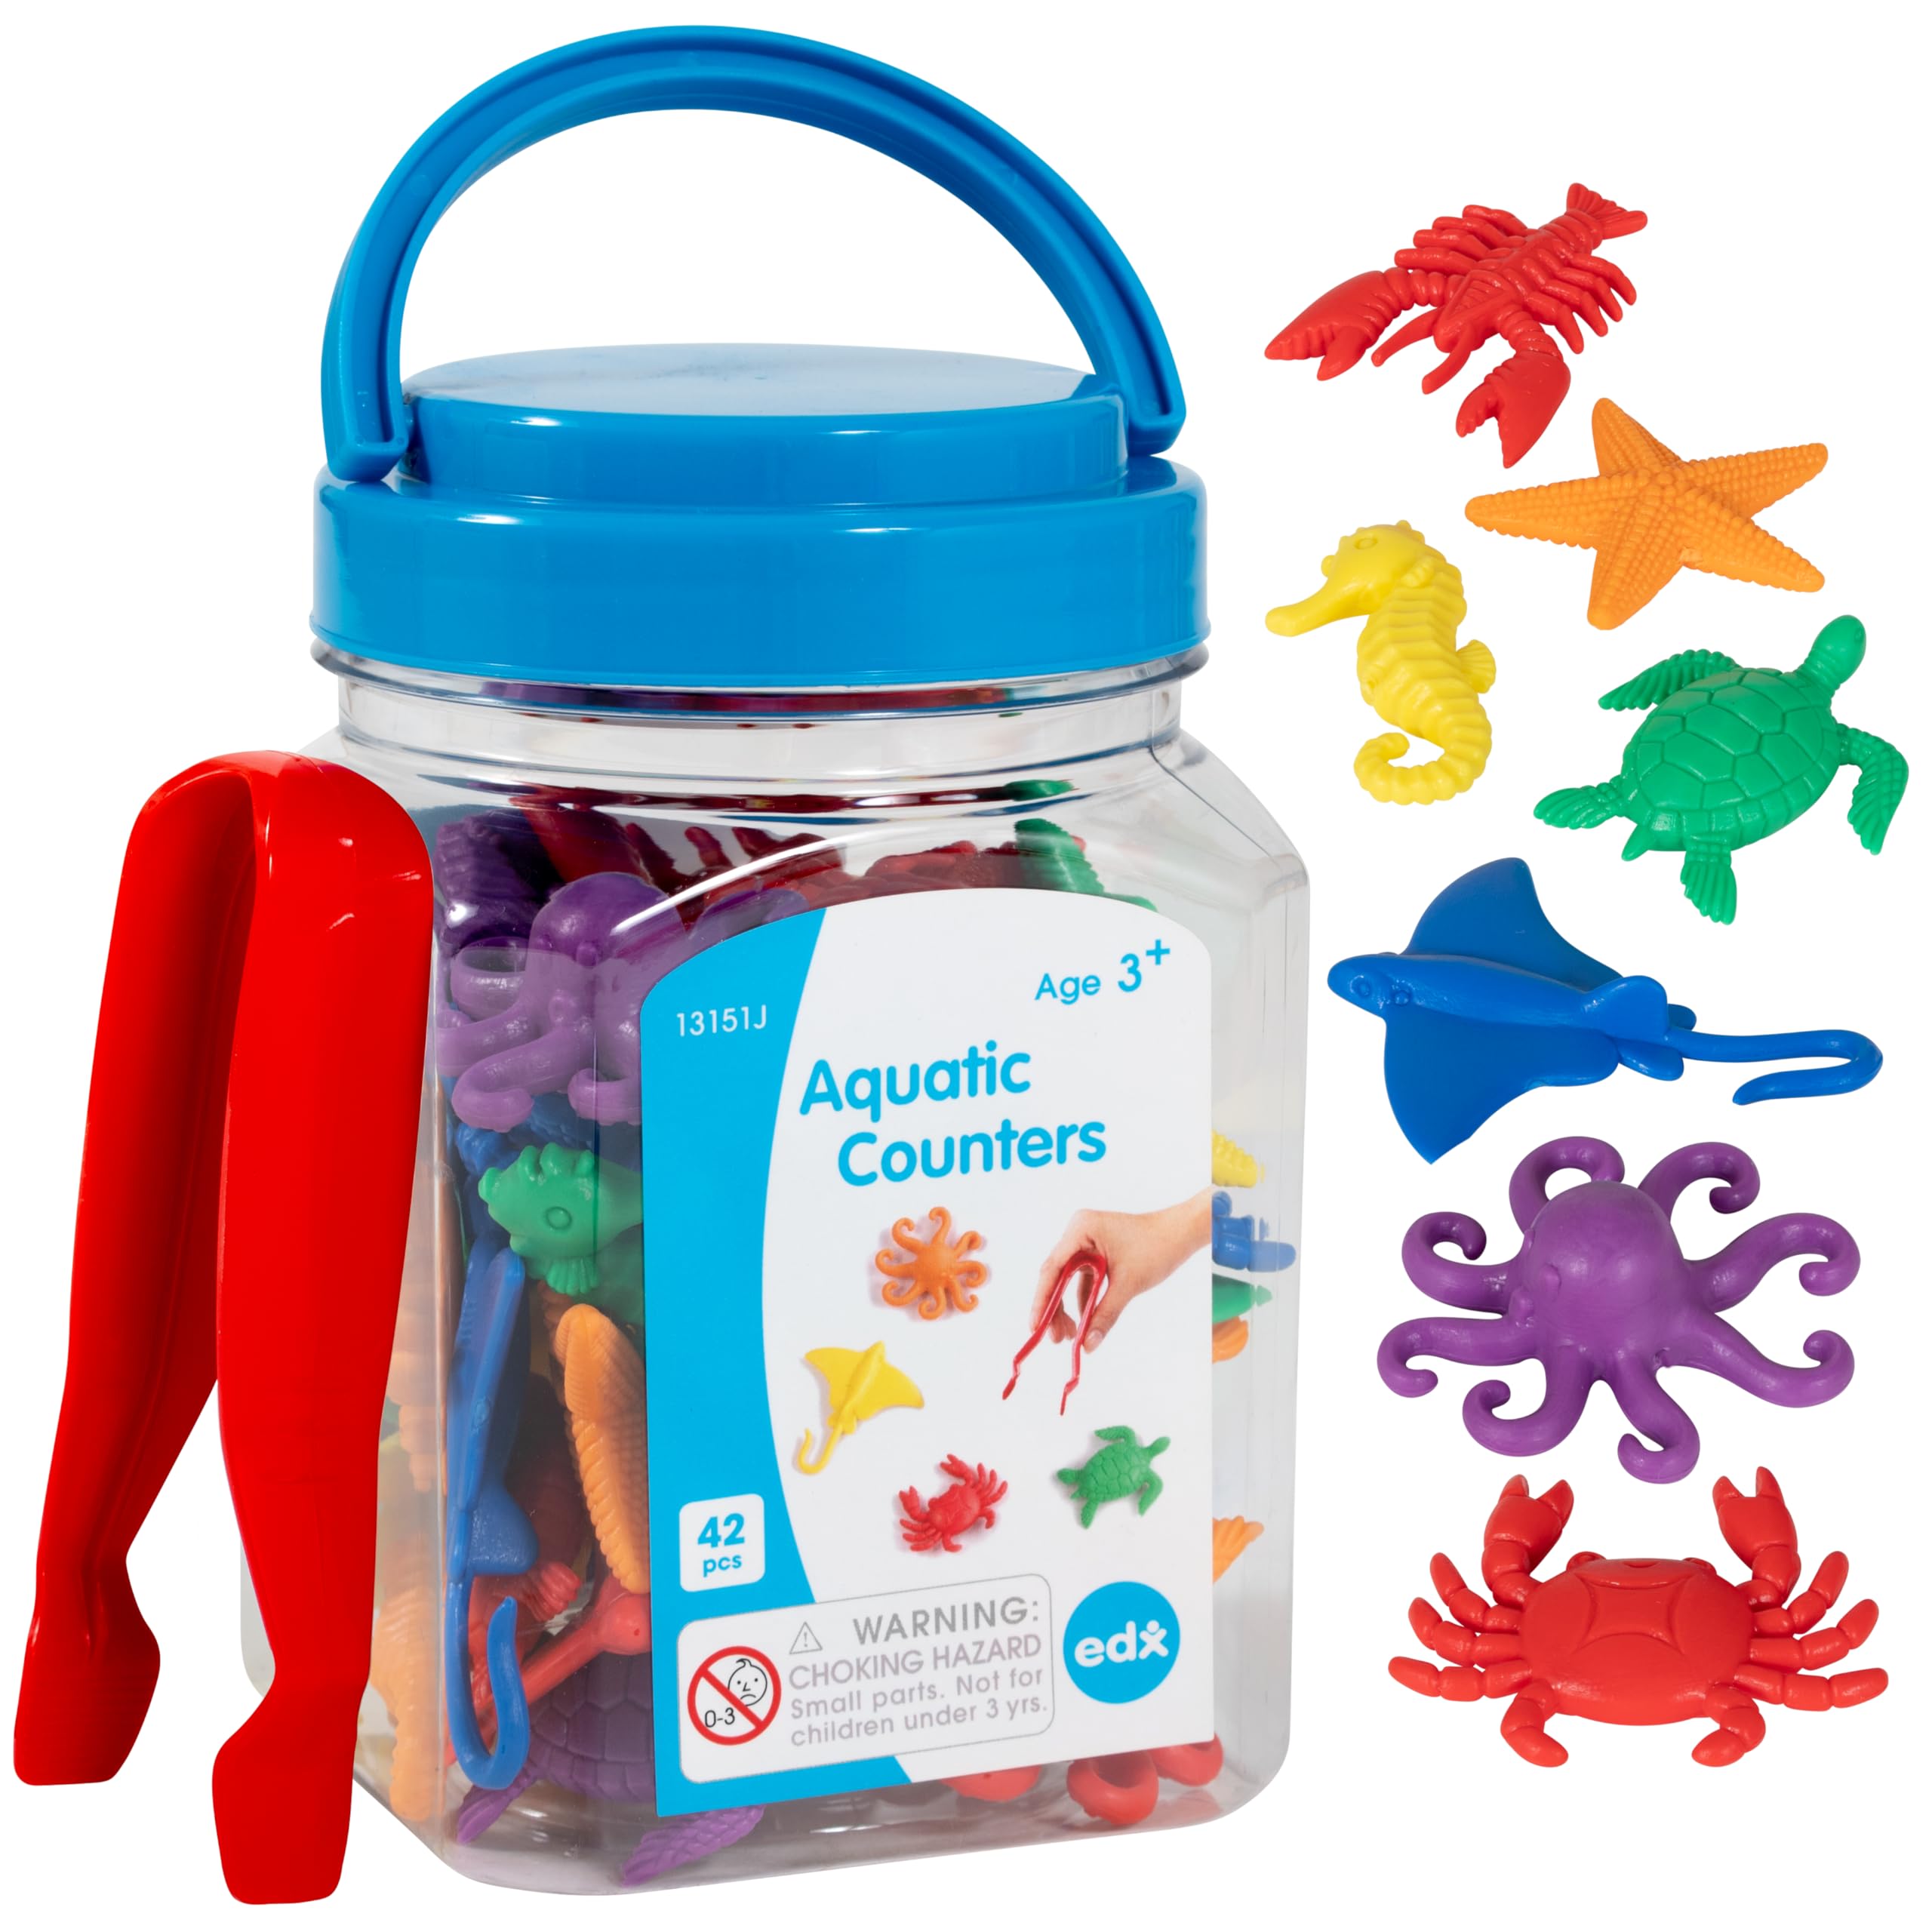 edxeducation-13151 Aquatic Counters - Mini Jar Set of 42 - Learn Counting, Colors, Sorting and Sequencing - Math Manipulative for Kids